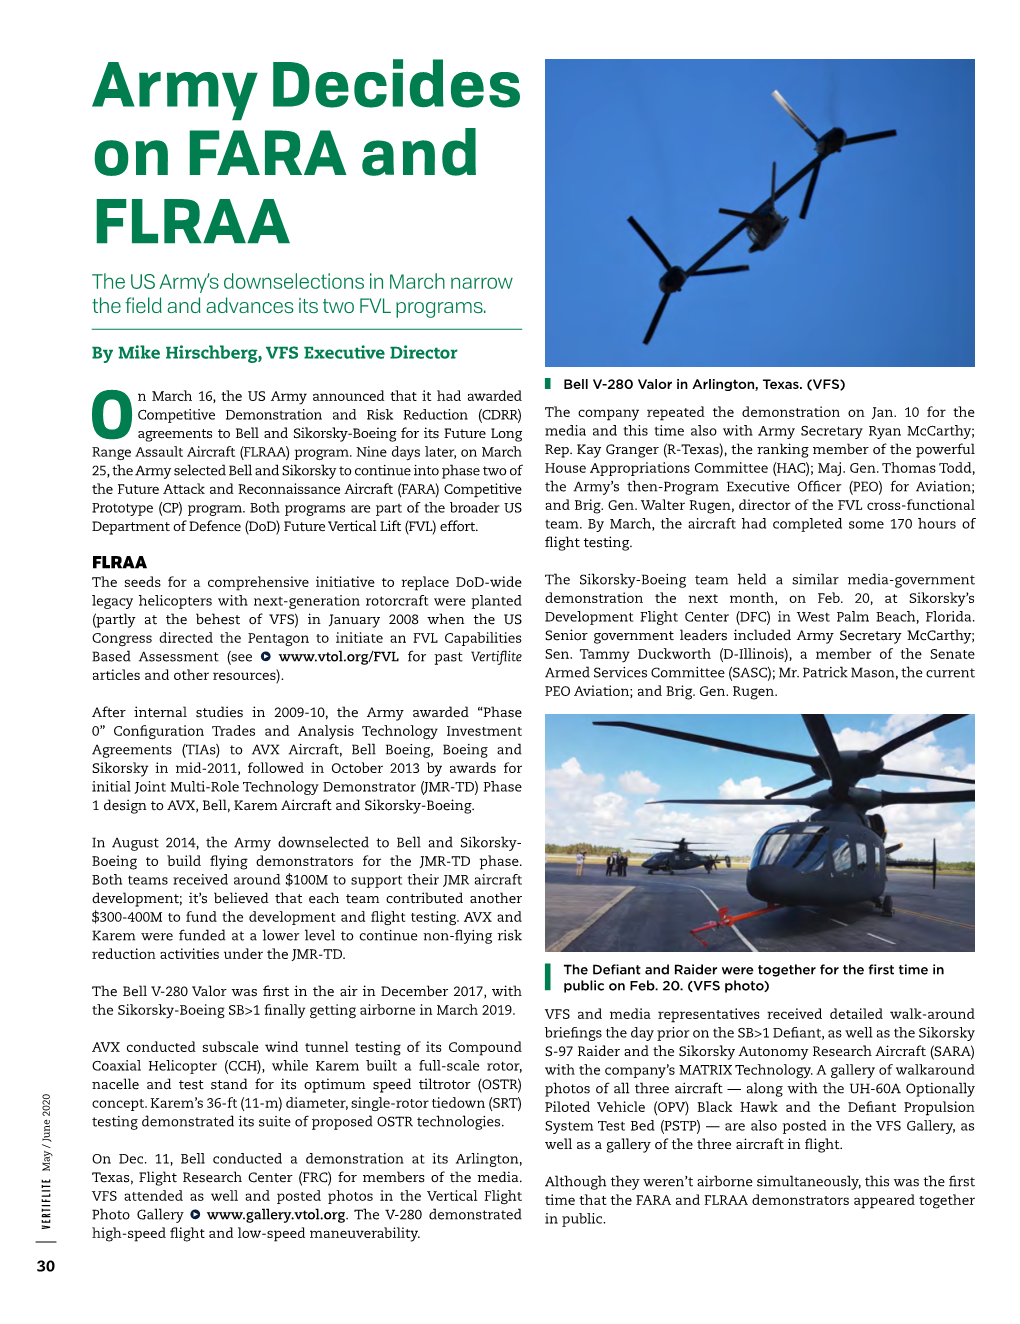 Army Decides on FARA and FLRAA the US Army’S Downselections in March Narrow the Field and Advances Its Two FVL Programs